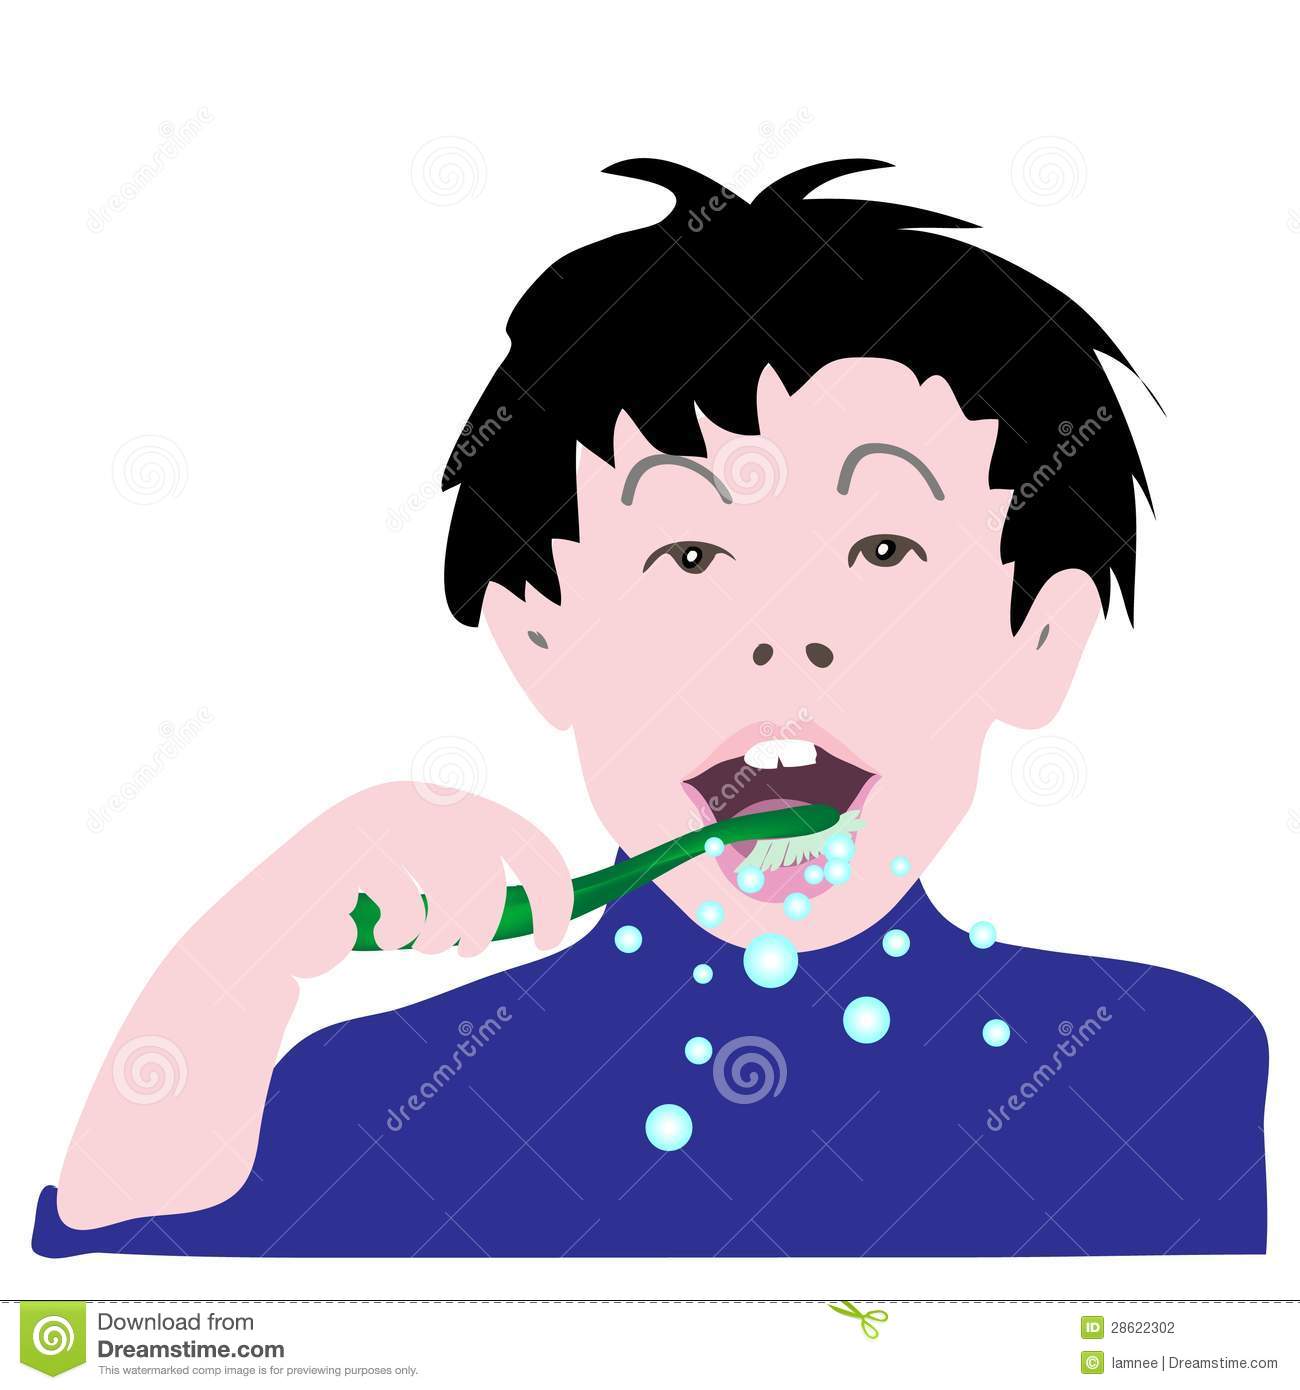 Illustration Of A Kid Brushing His Teeth Stock Photography   Image